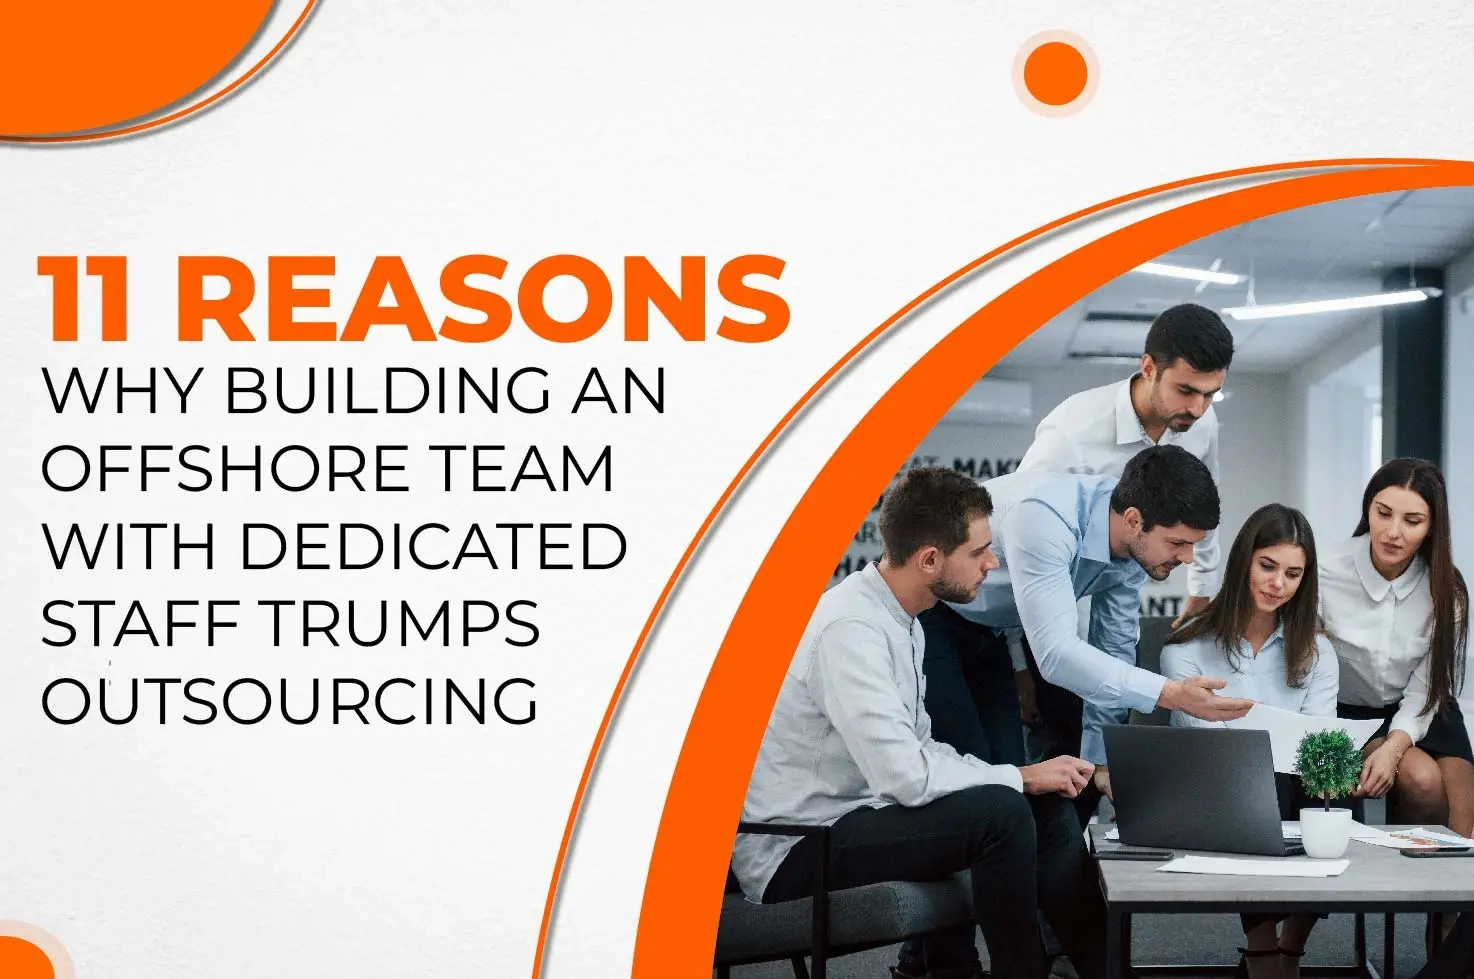 11 Reasons Why Building an Offshore Team with Dedicated Staff Trumps Outsourcing